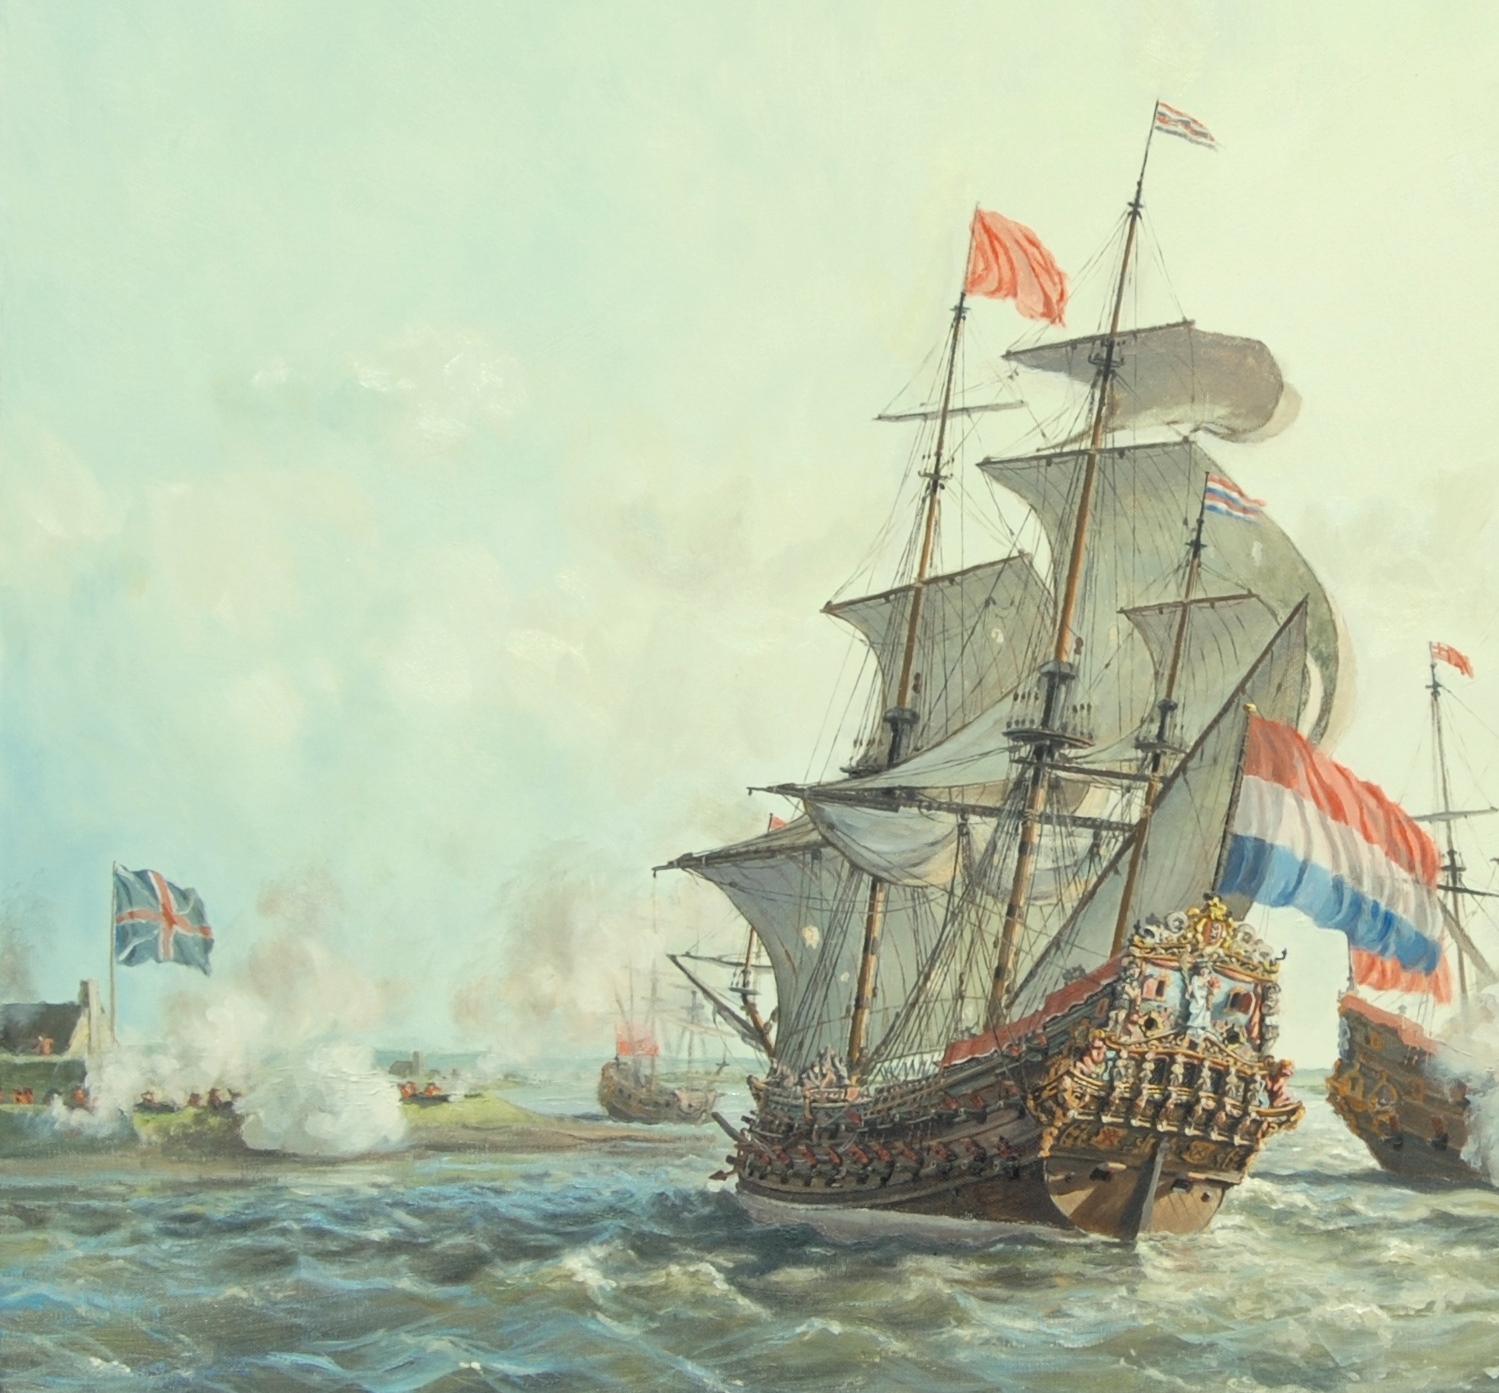 Dutch attacking the English during the Anglo-Dutch Wars